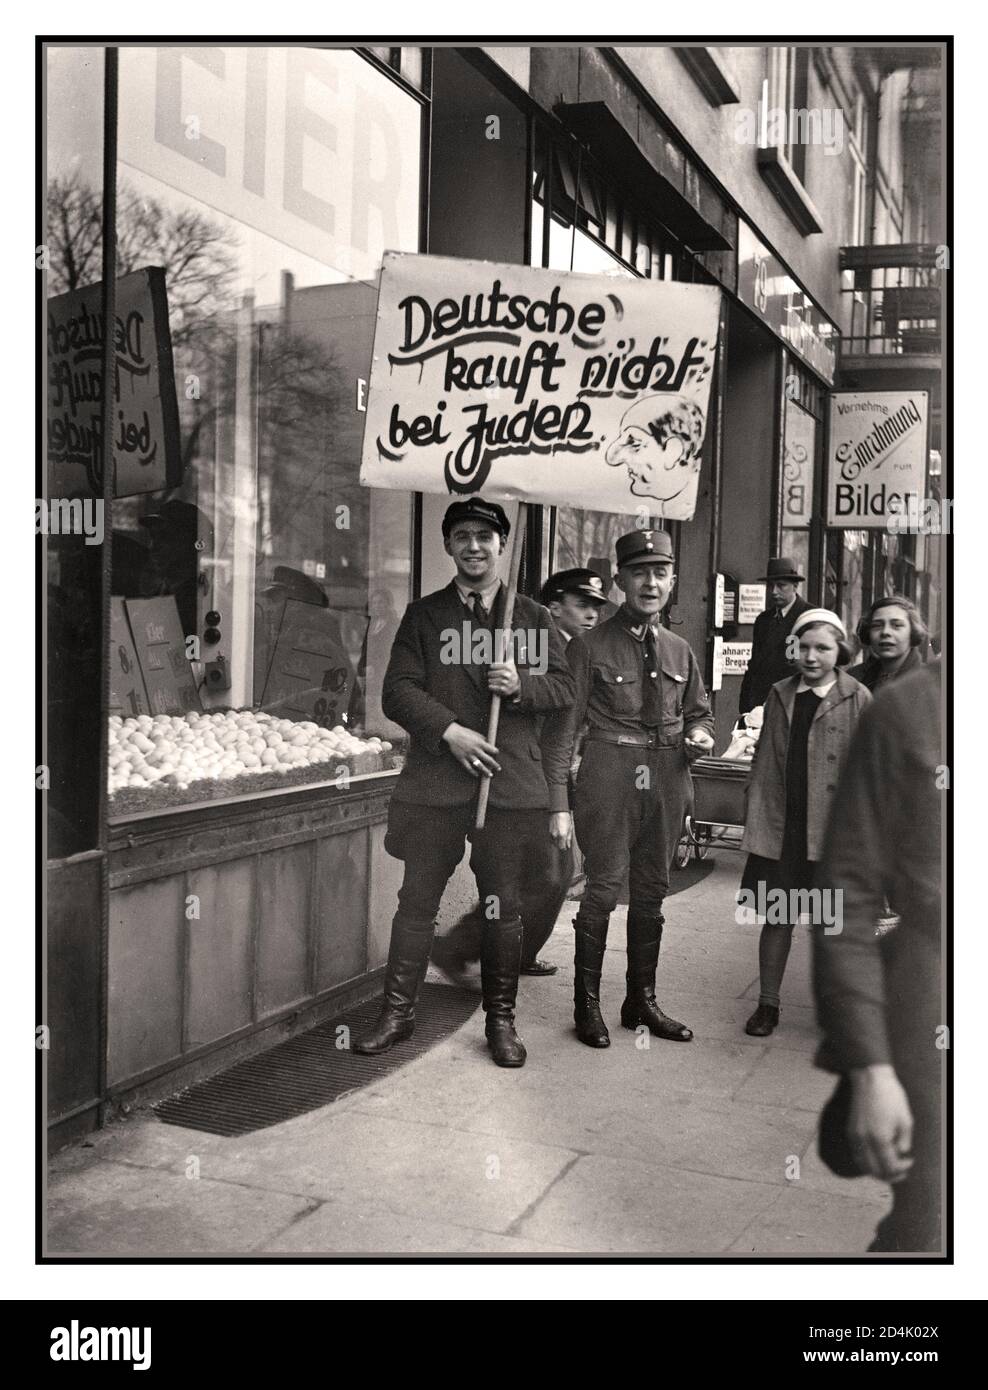 1930's Germany Nazi Anti Jewish anti-Semitic boycott propaganda April 1st 1933 Vintage Pre-War anti-semitic crude racist inflammatory placard with smiling NSDAP ‘goons’.... 'Germans do not buy from Jews' outside a Jewish owned business.. Nazi government organized a one-day boycott of all Jewish-owned businesses in Germany, with the assistance of Julius Streicher, publisher of the anti-Semitic daily newspaper Der Sturmer. The boycott failed to attract public support. Days later, laws were proclaimed to remove German Jews from various occupations. Stock Photo